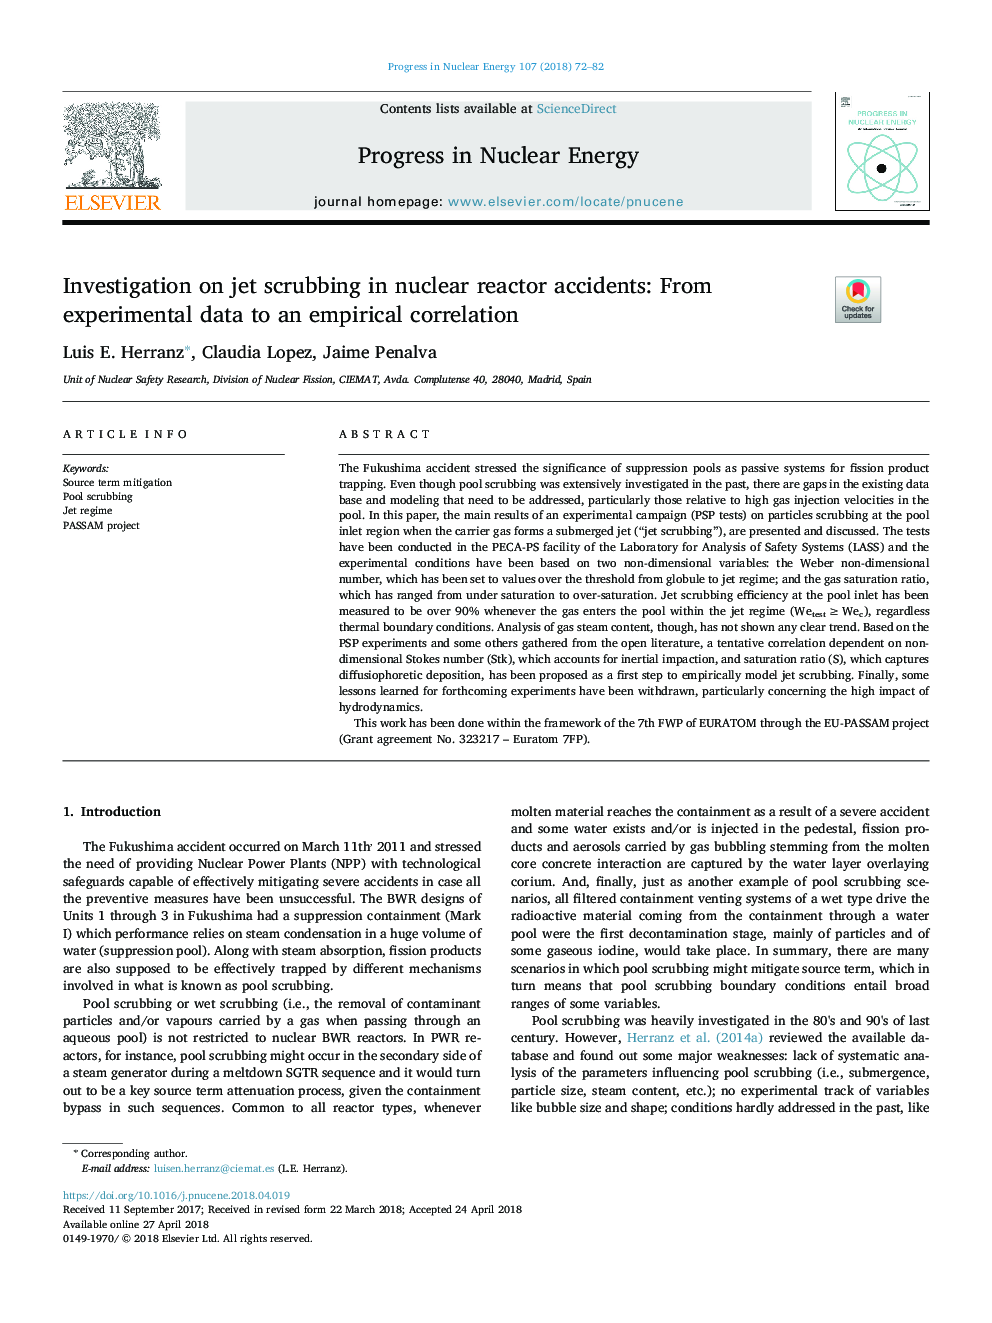 Investigation on jet scrubbing in nuclear reactor accidents: From experimental data to an empirical correlation